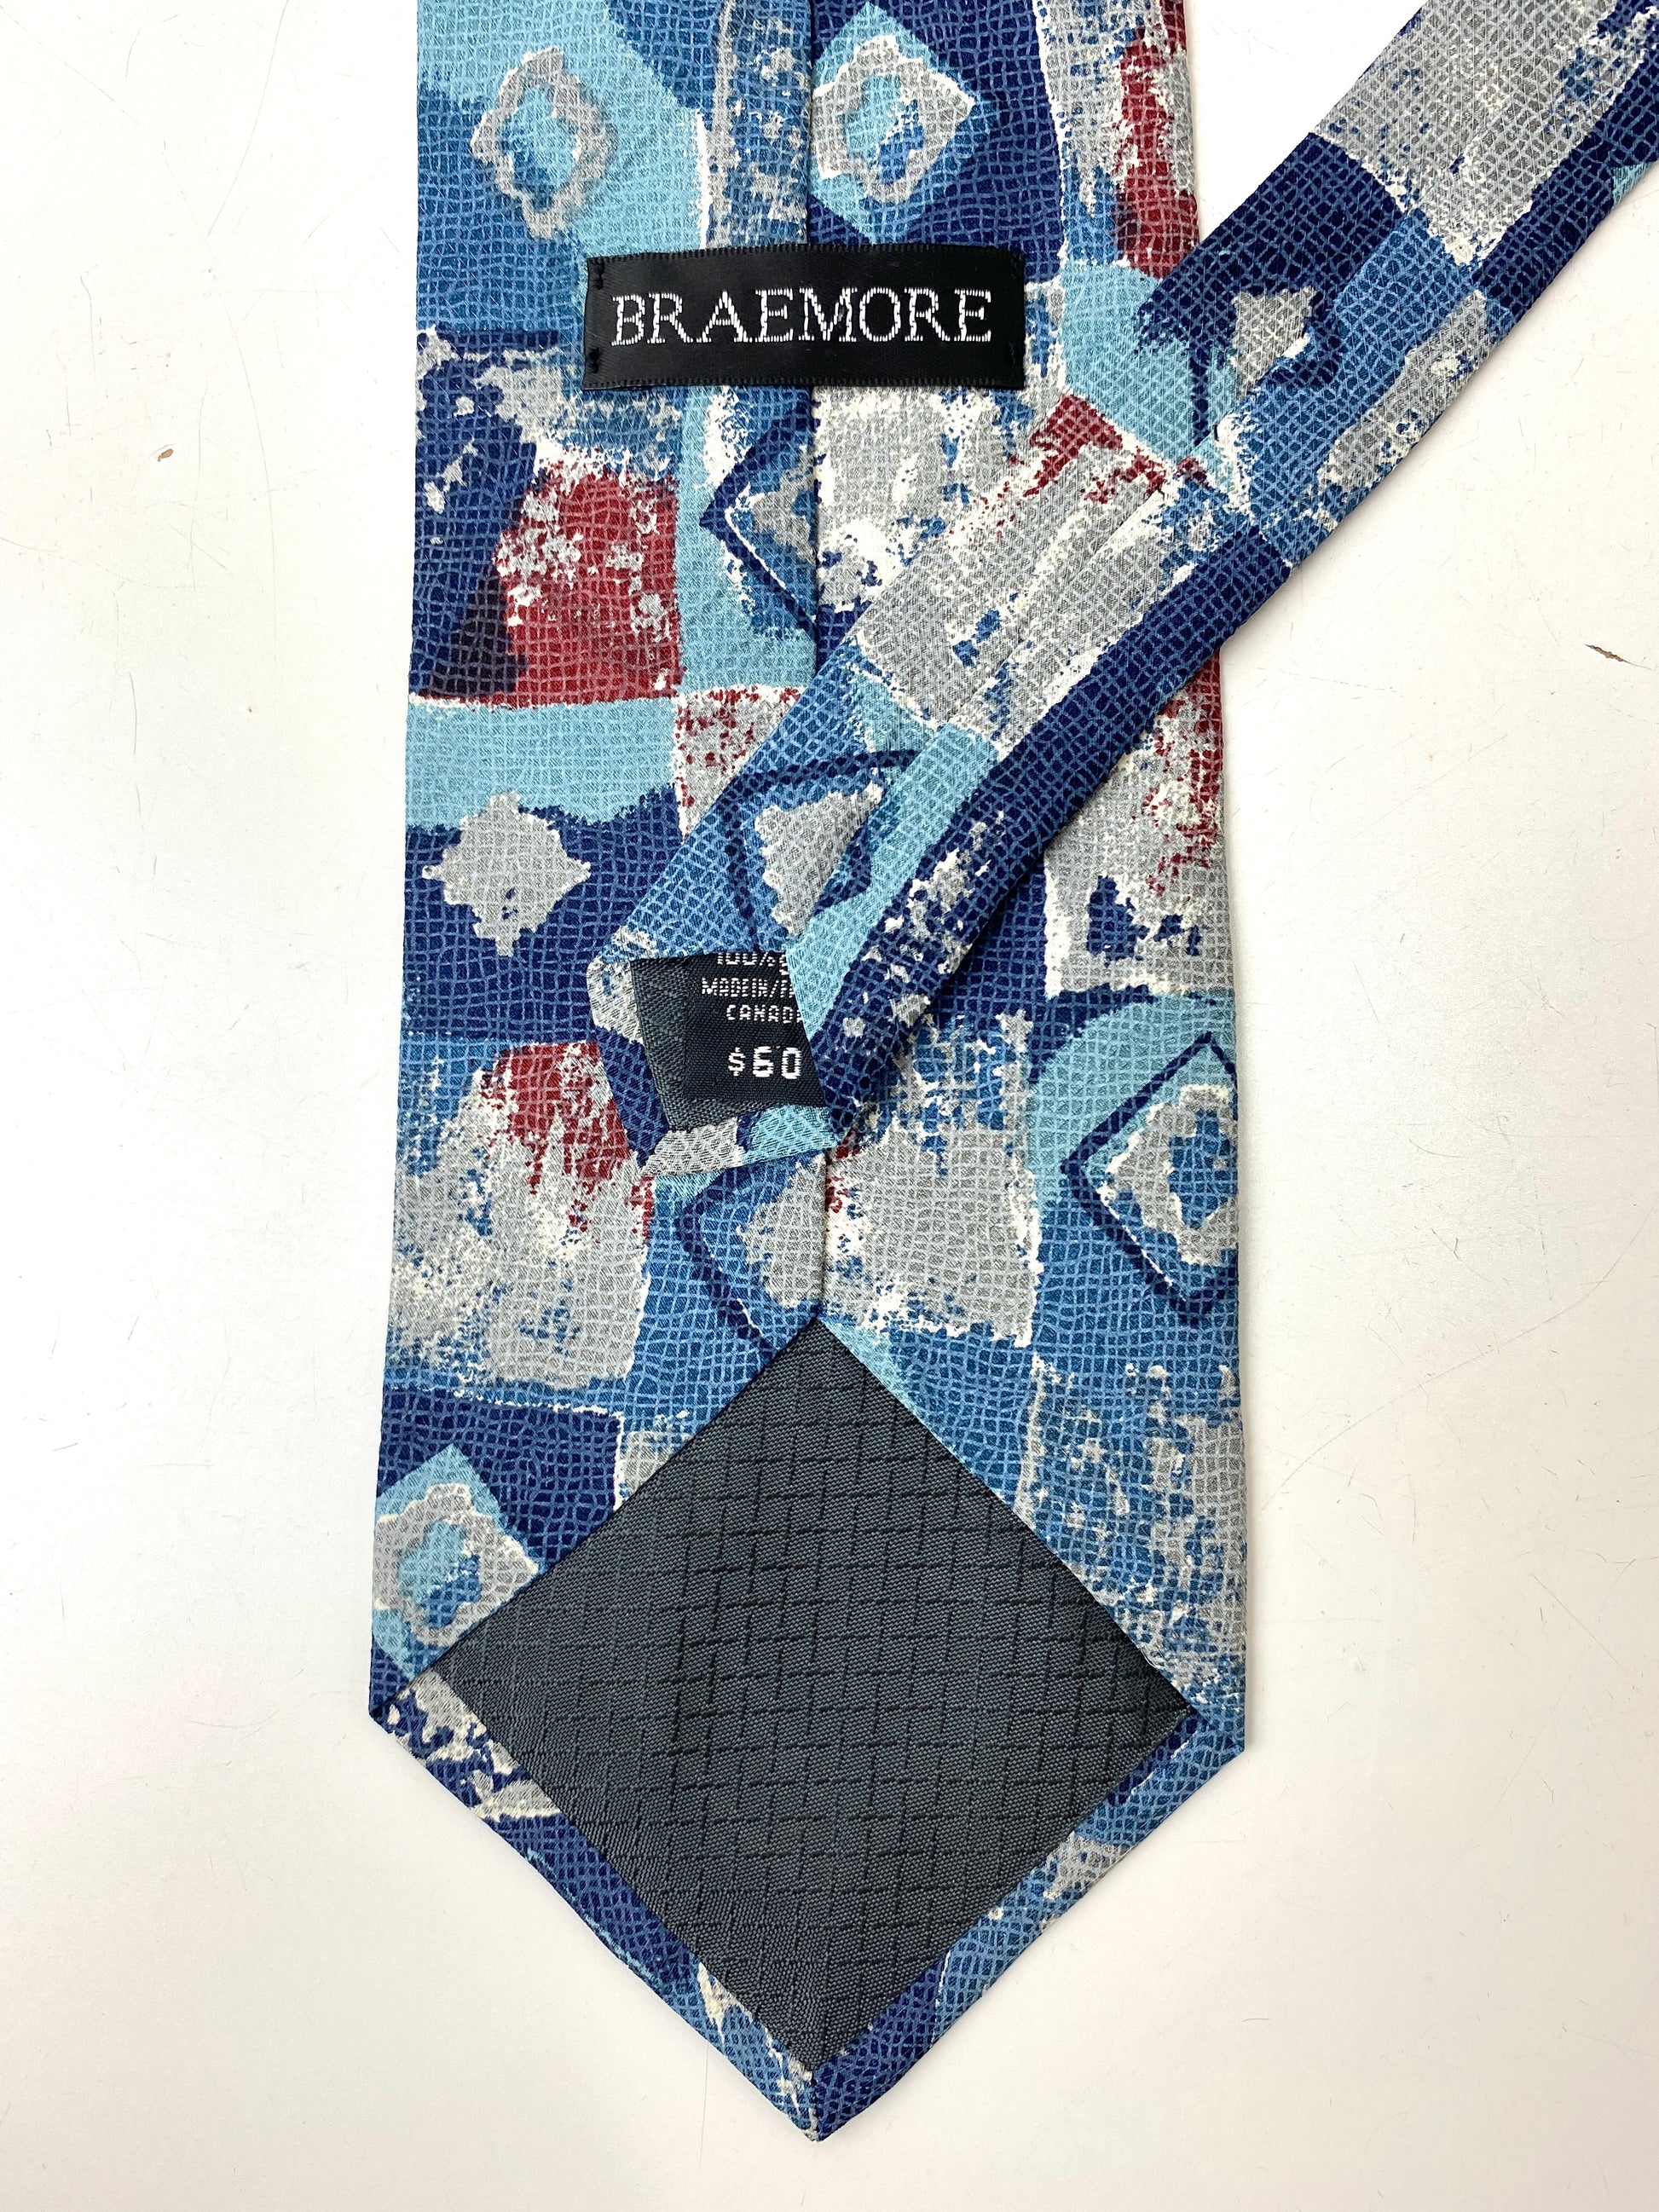 Back and labels of: 90s Deadstock Silk Necktie, Men's Vintage Blue/Red Diamond Square Pattern Tie, NOS